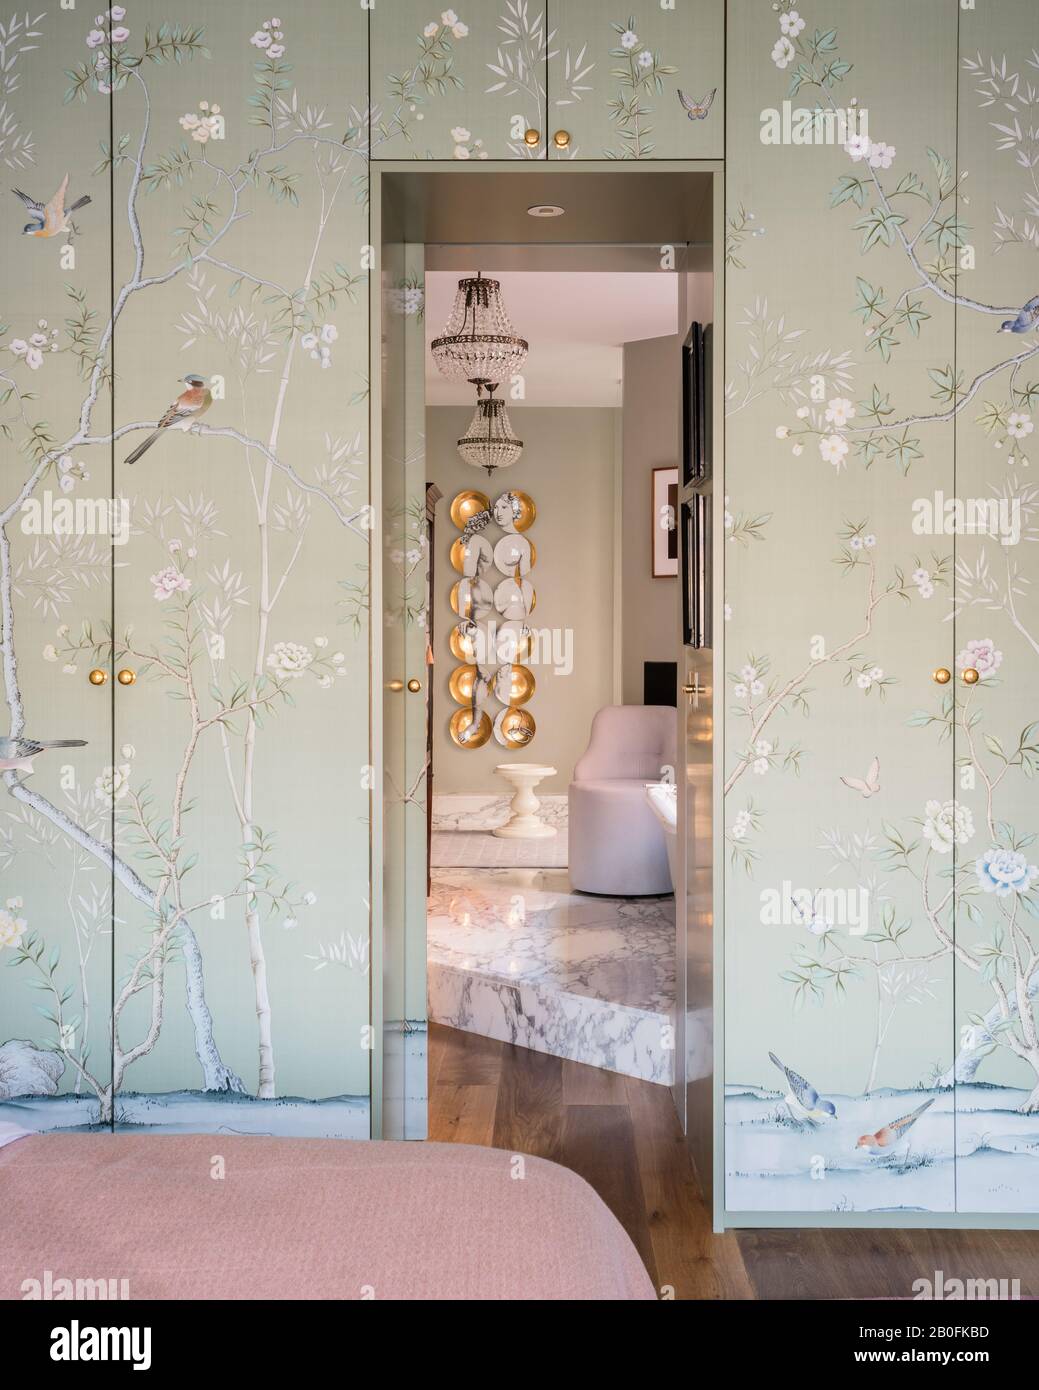 Chinoiserie wall paper covering wardrobe doors. Stock Photo